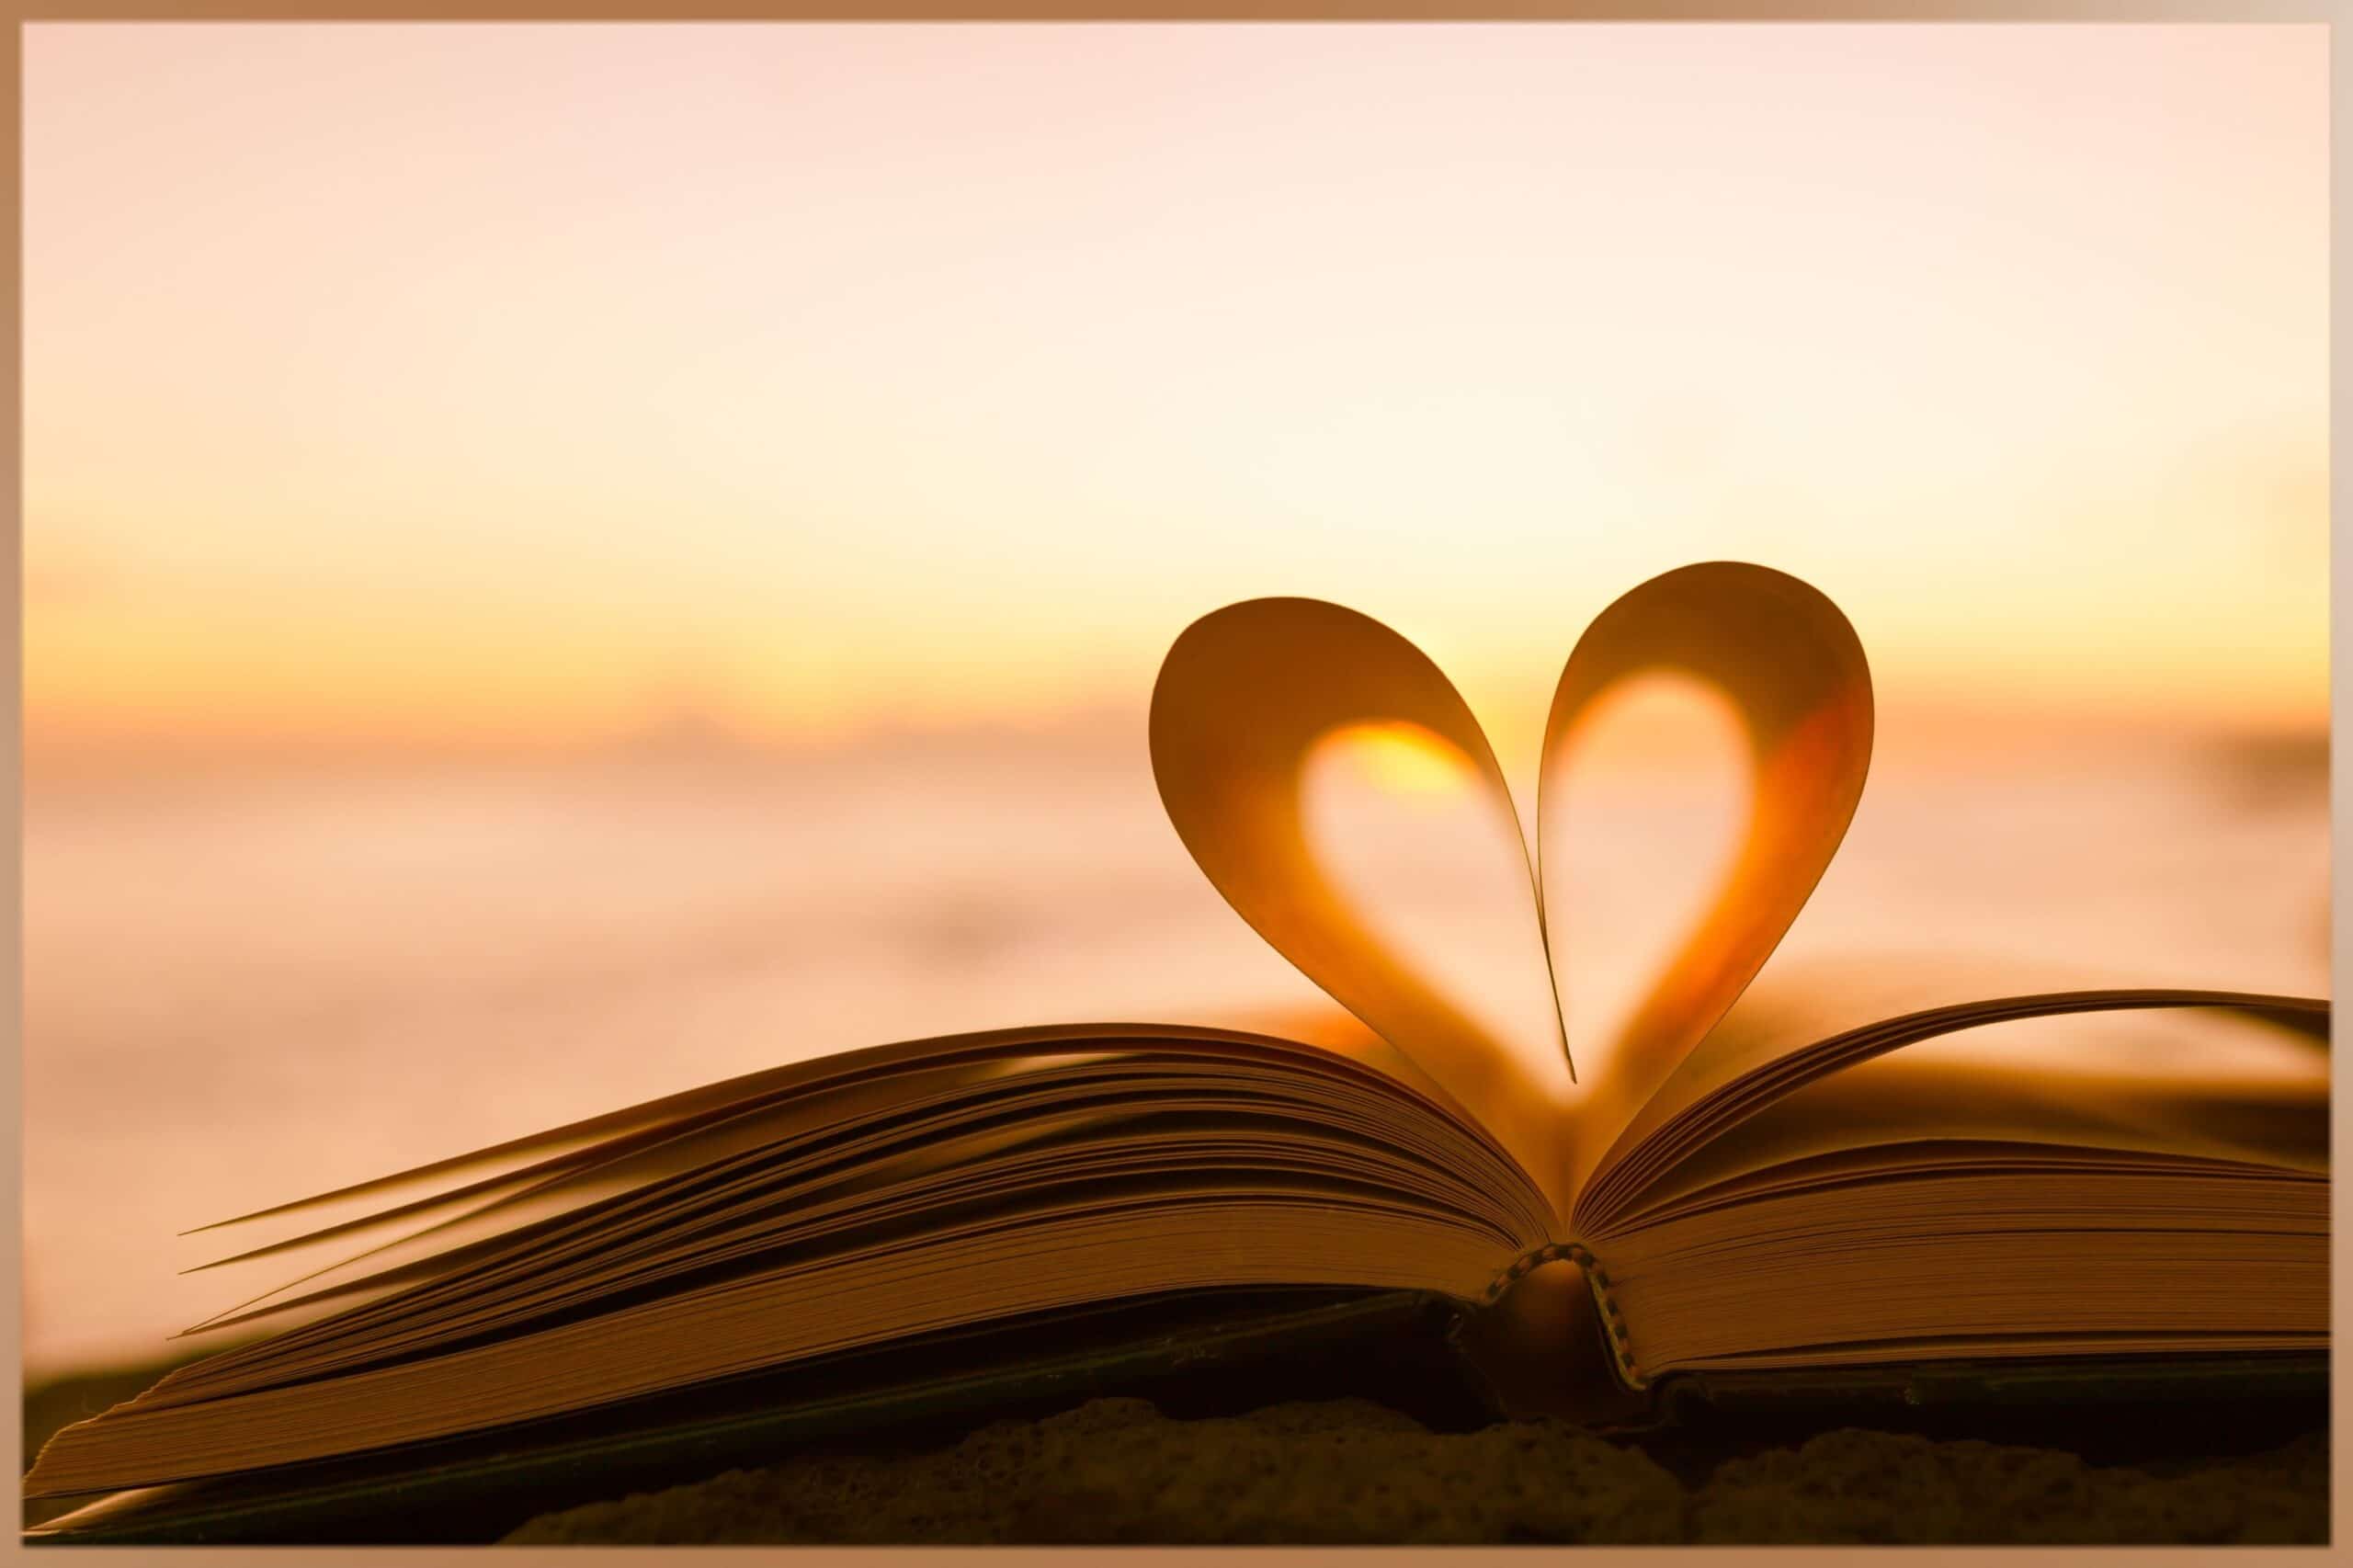 Heart shaped opened book